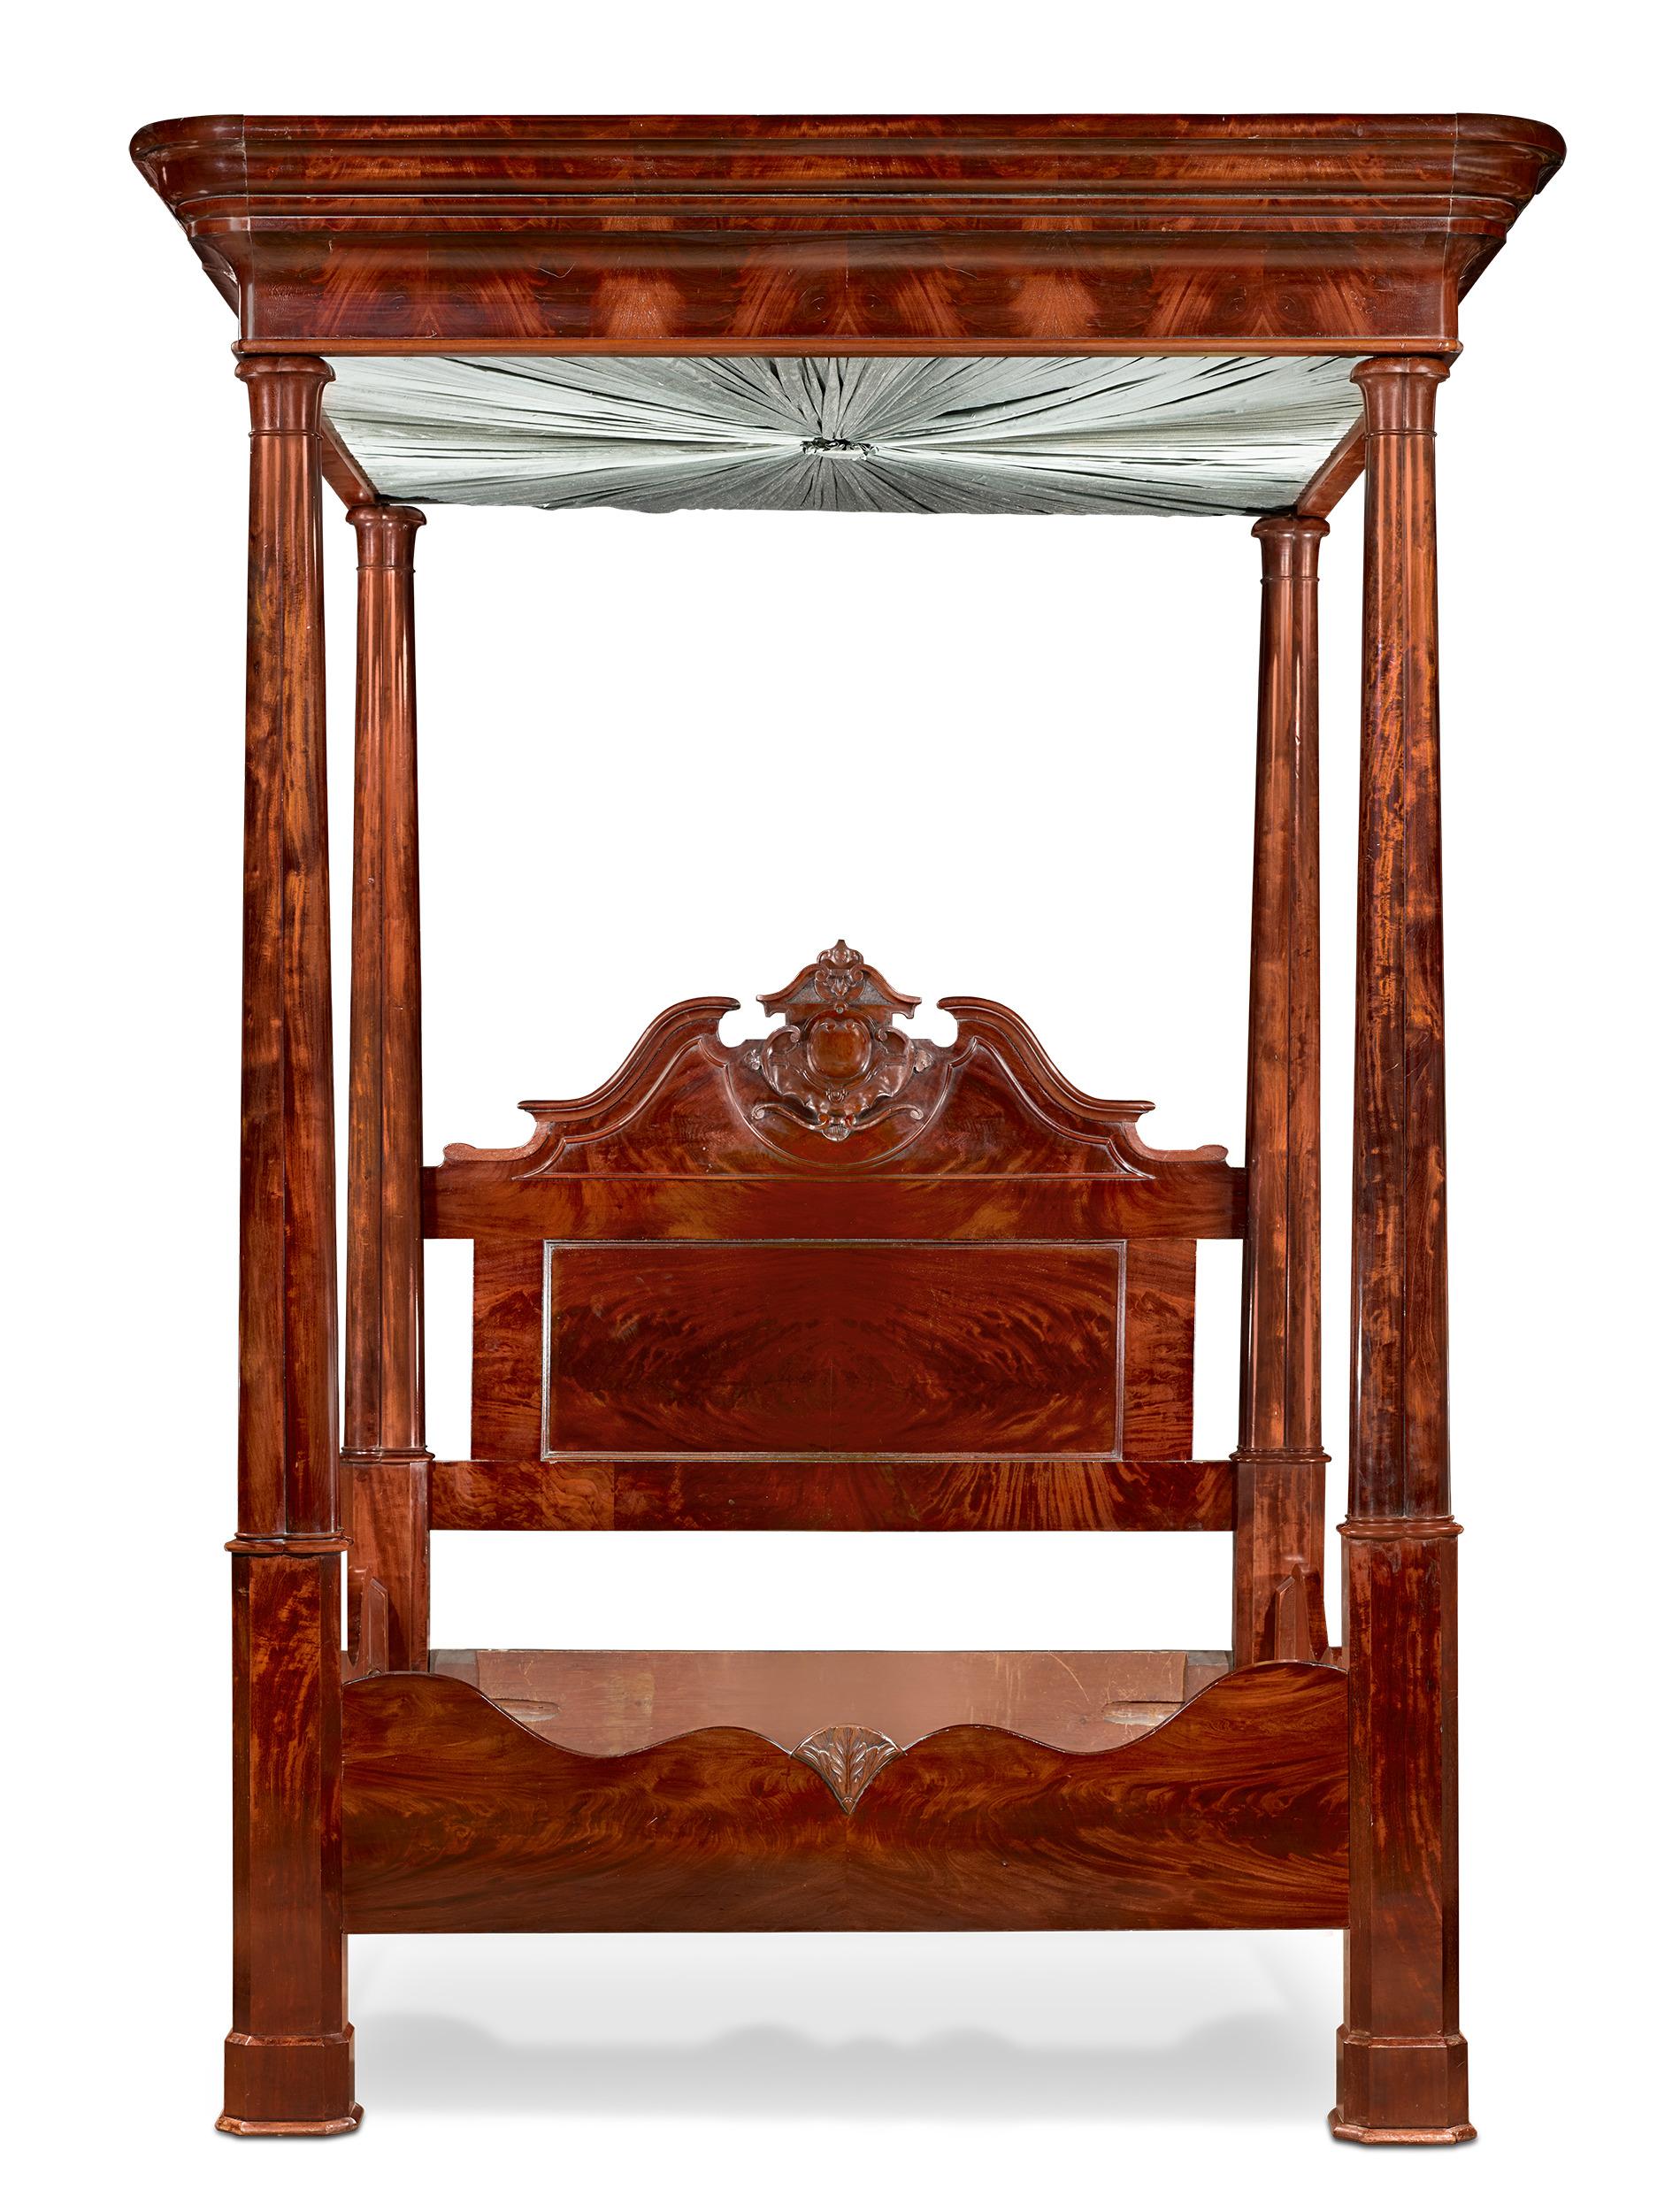 This lavish American tester bed exhibits superior craftsmanship and detail. The design is embellished with elaborate carvings on the headboard and sides. The stunning wood grain enhances the appeal of the artfully crafted design. A canopy of folded